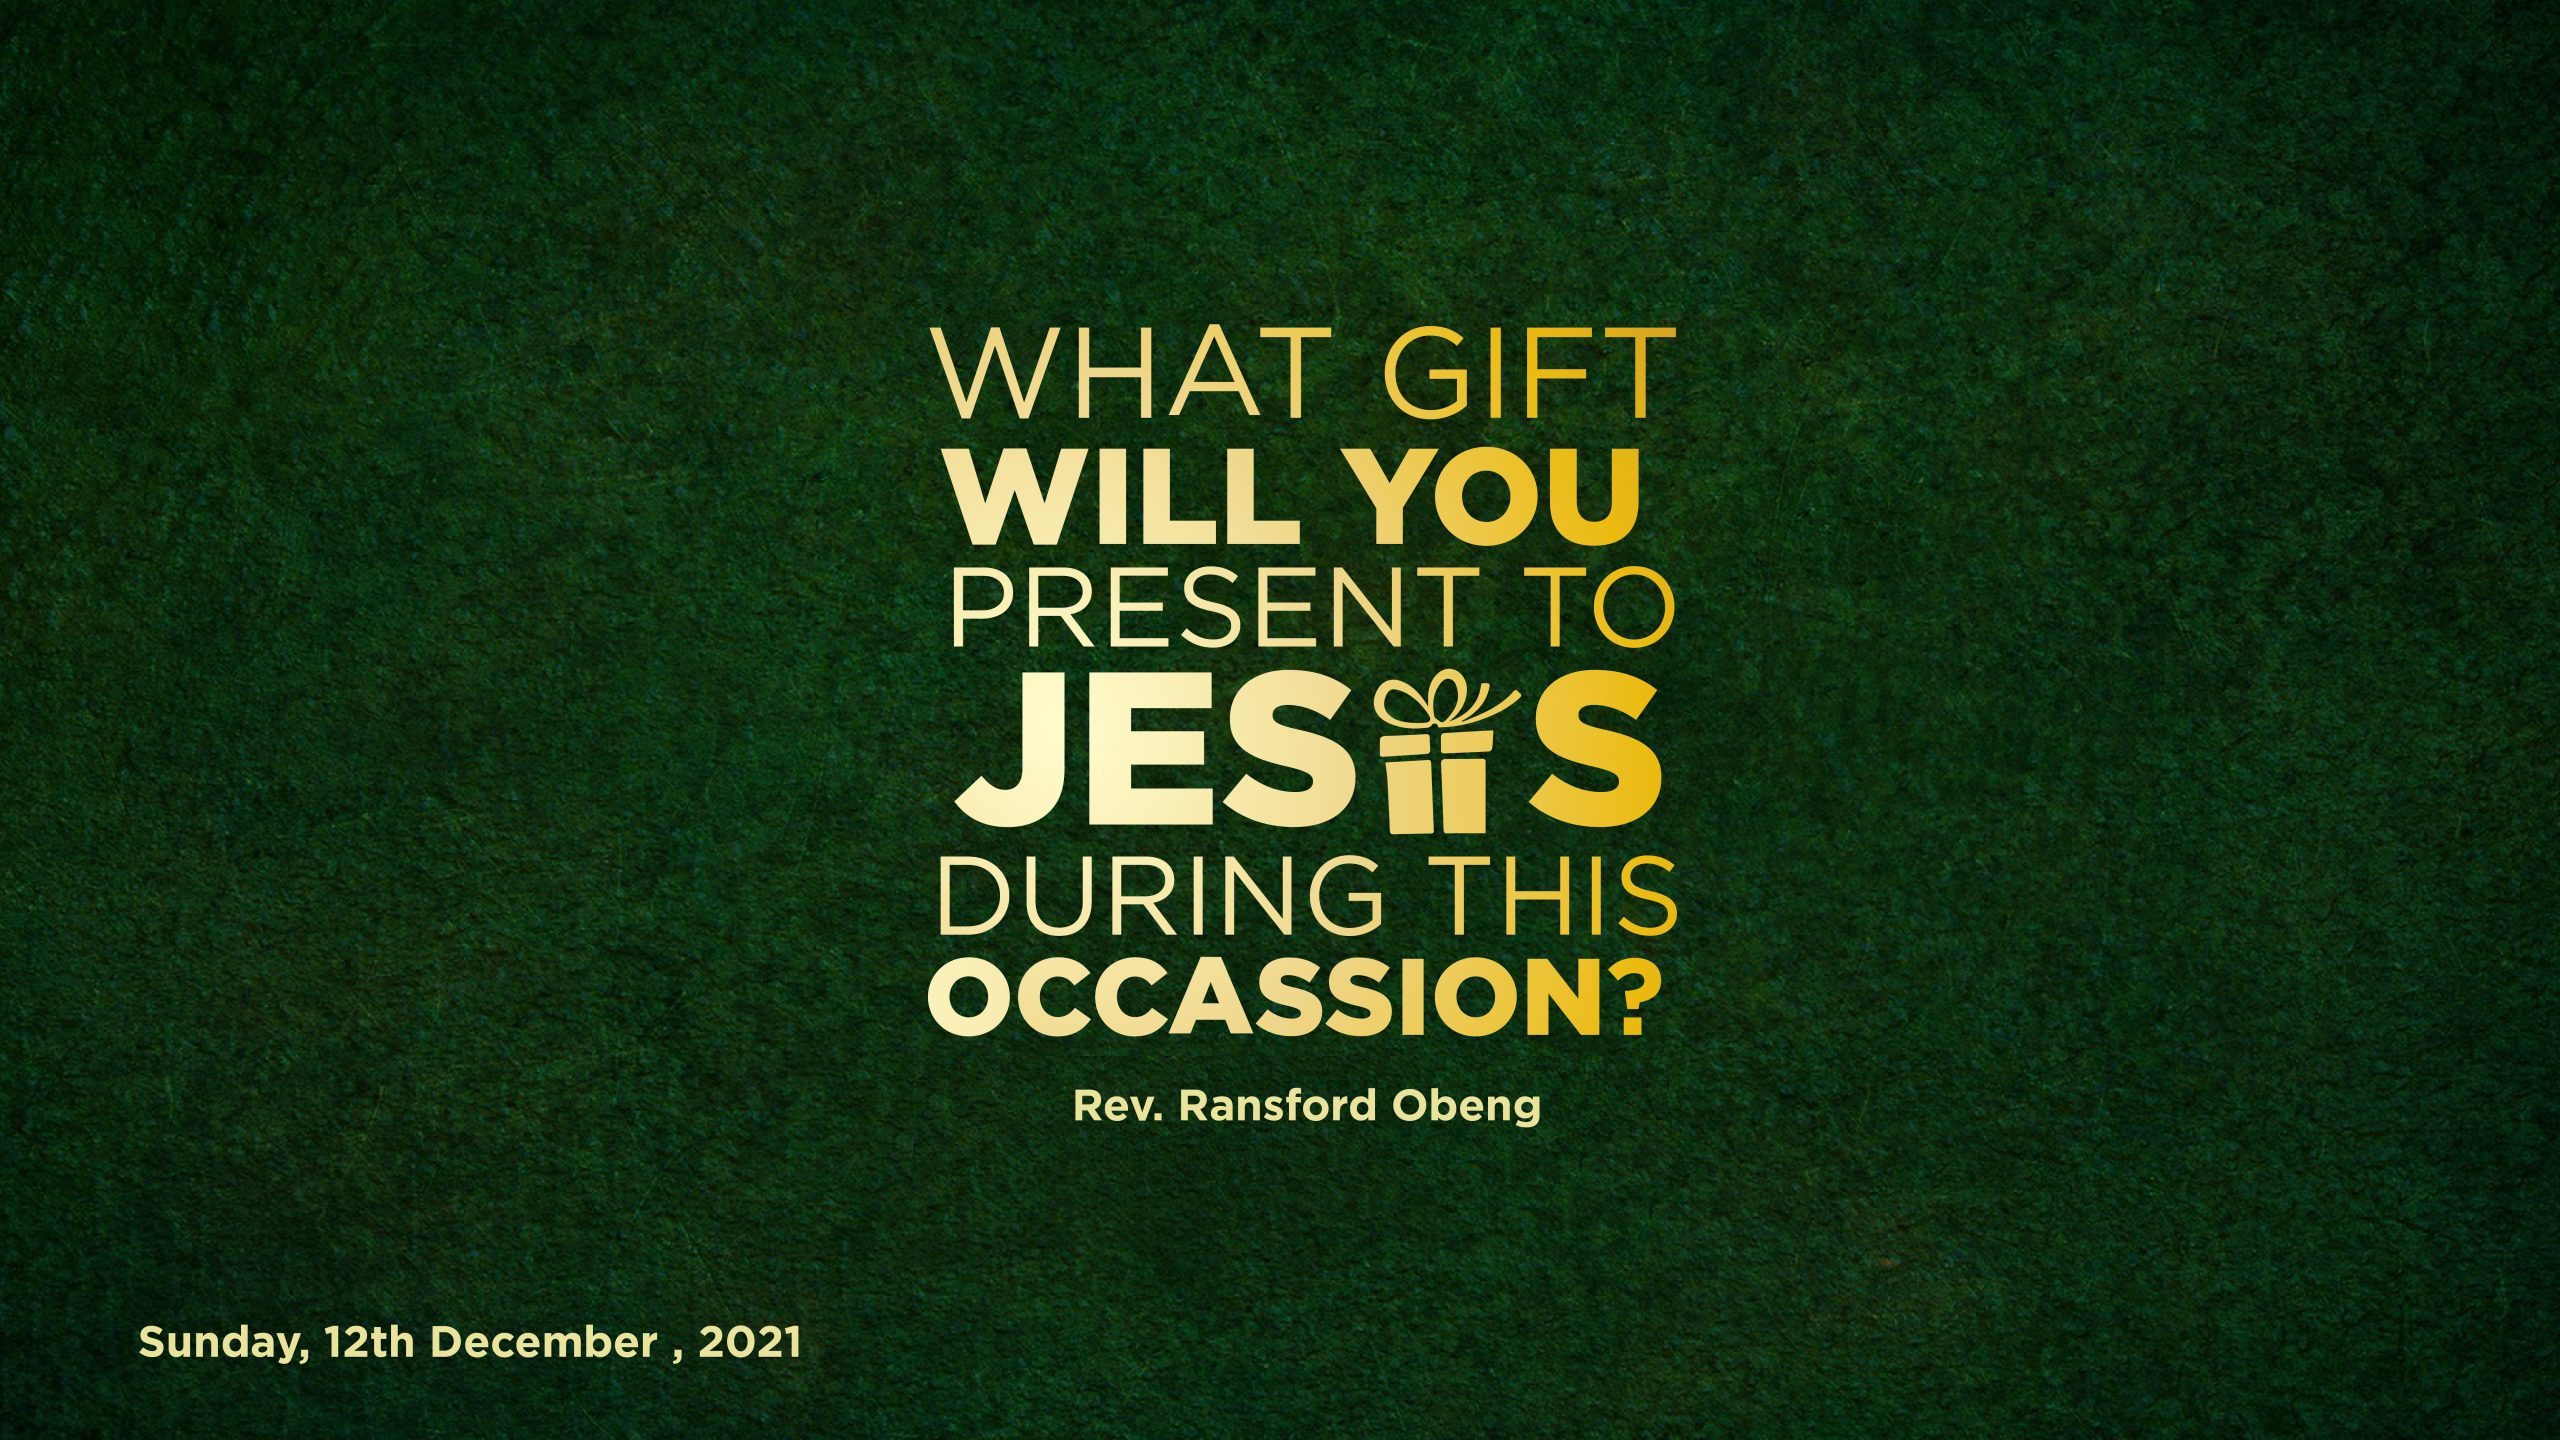 WHAT GIFT WILL YOU PRESENT TO JESUS DURING THIS OCCASION?